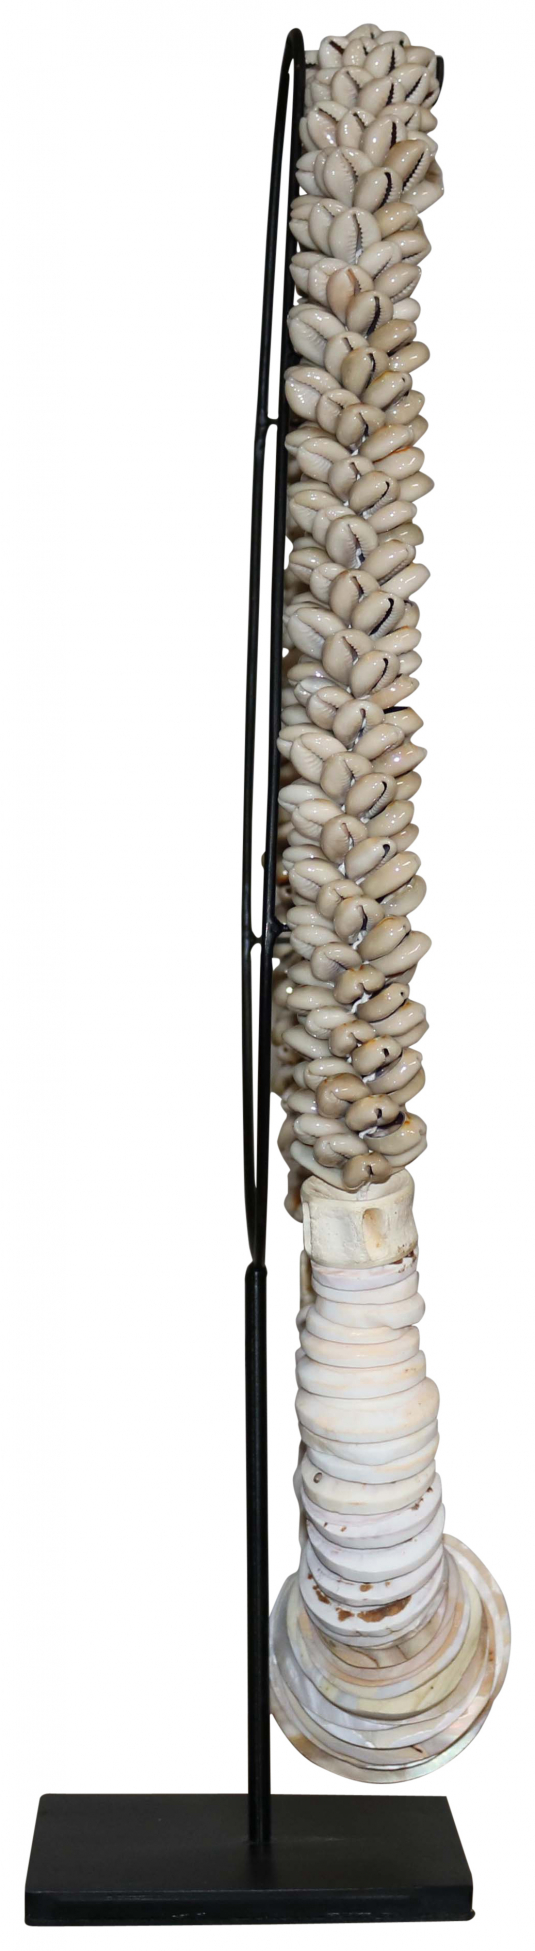 Block & Chisel shell chain on metal stand